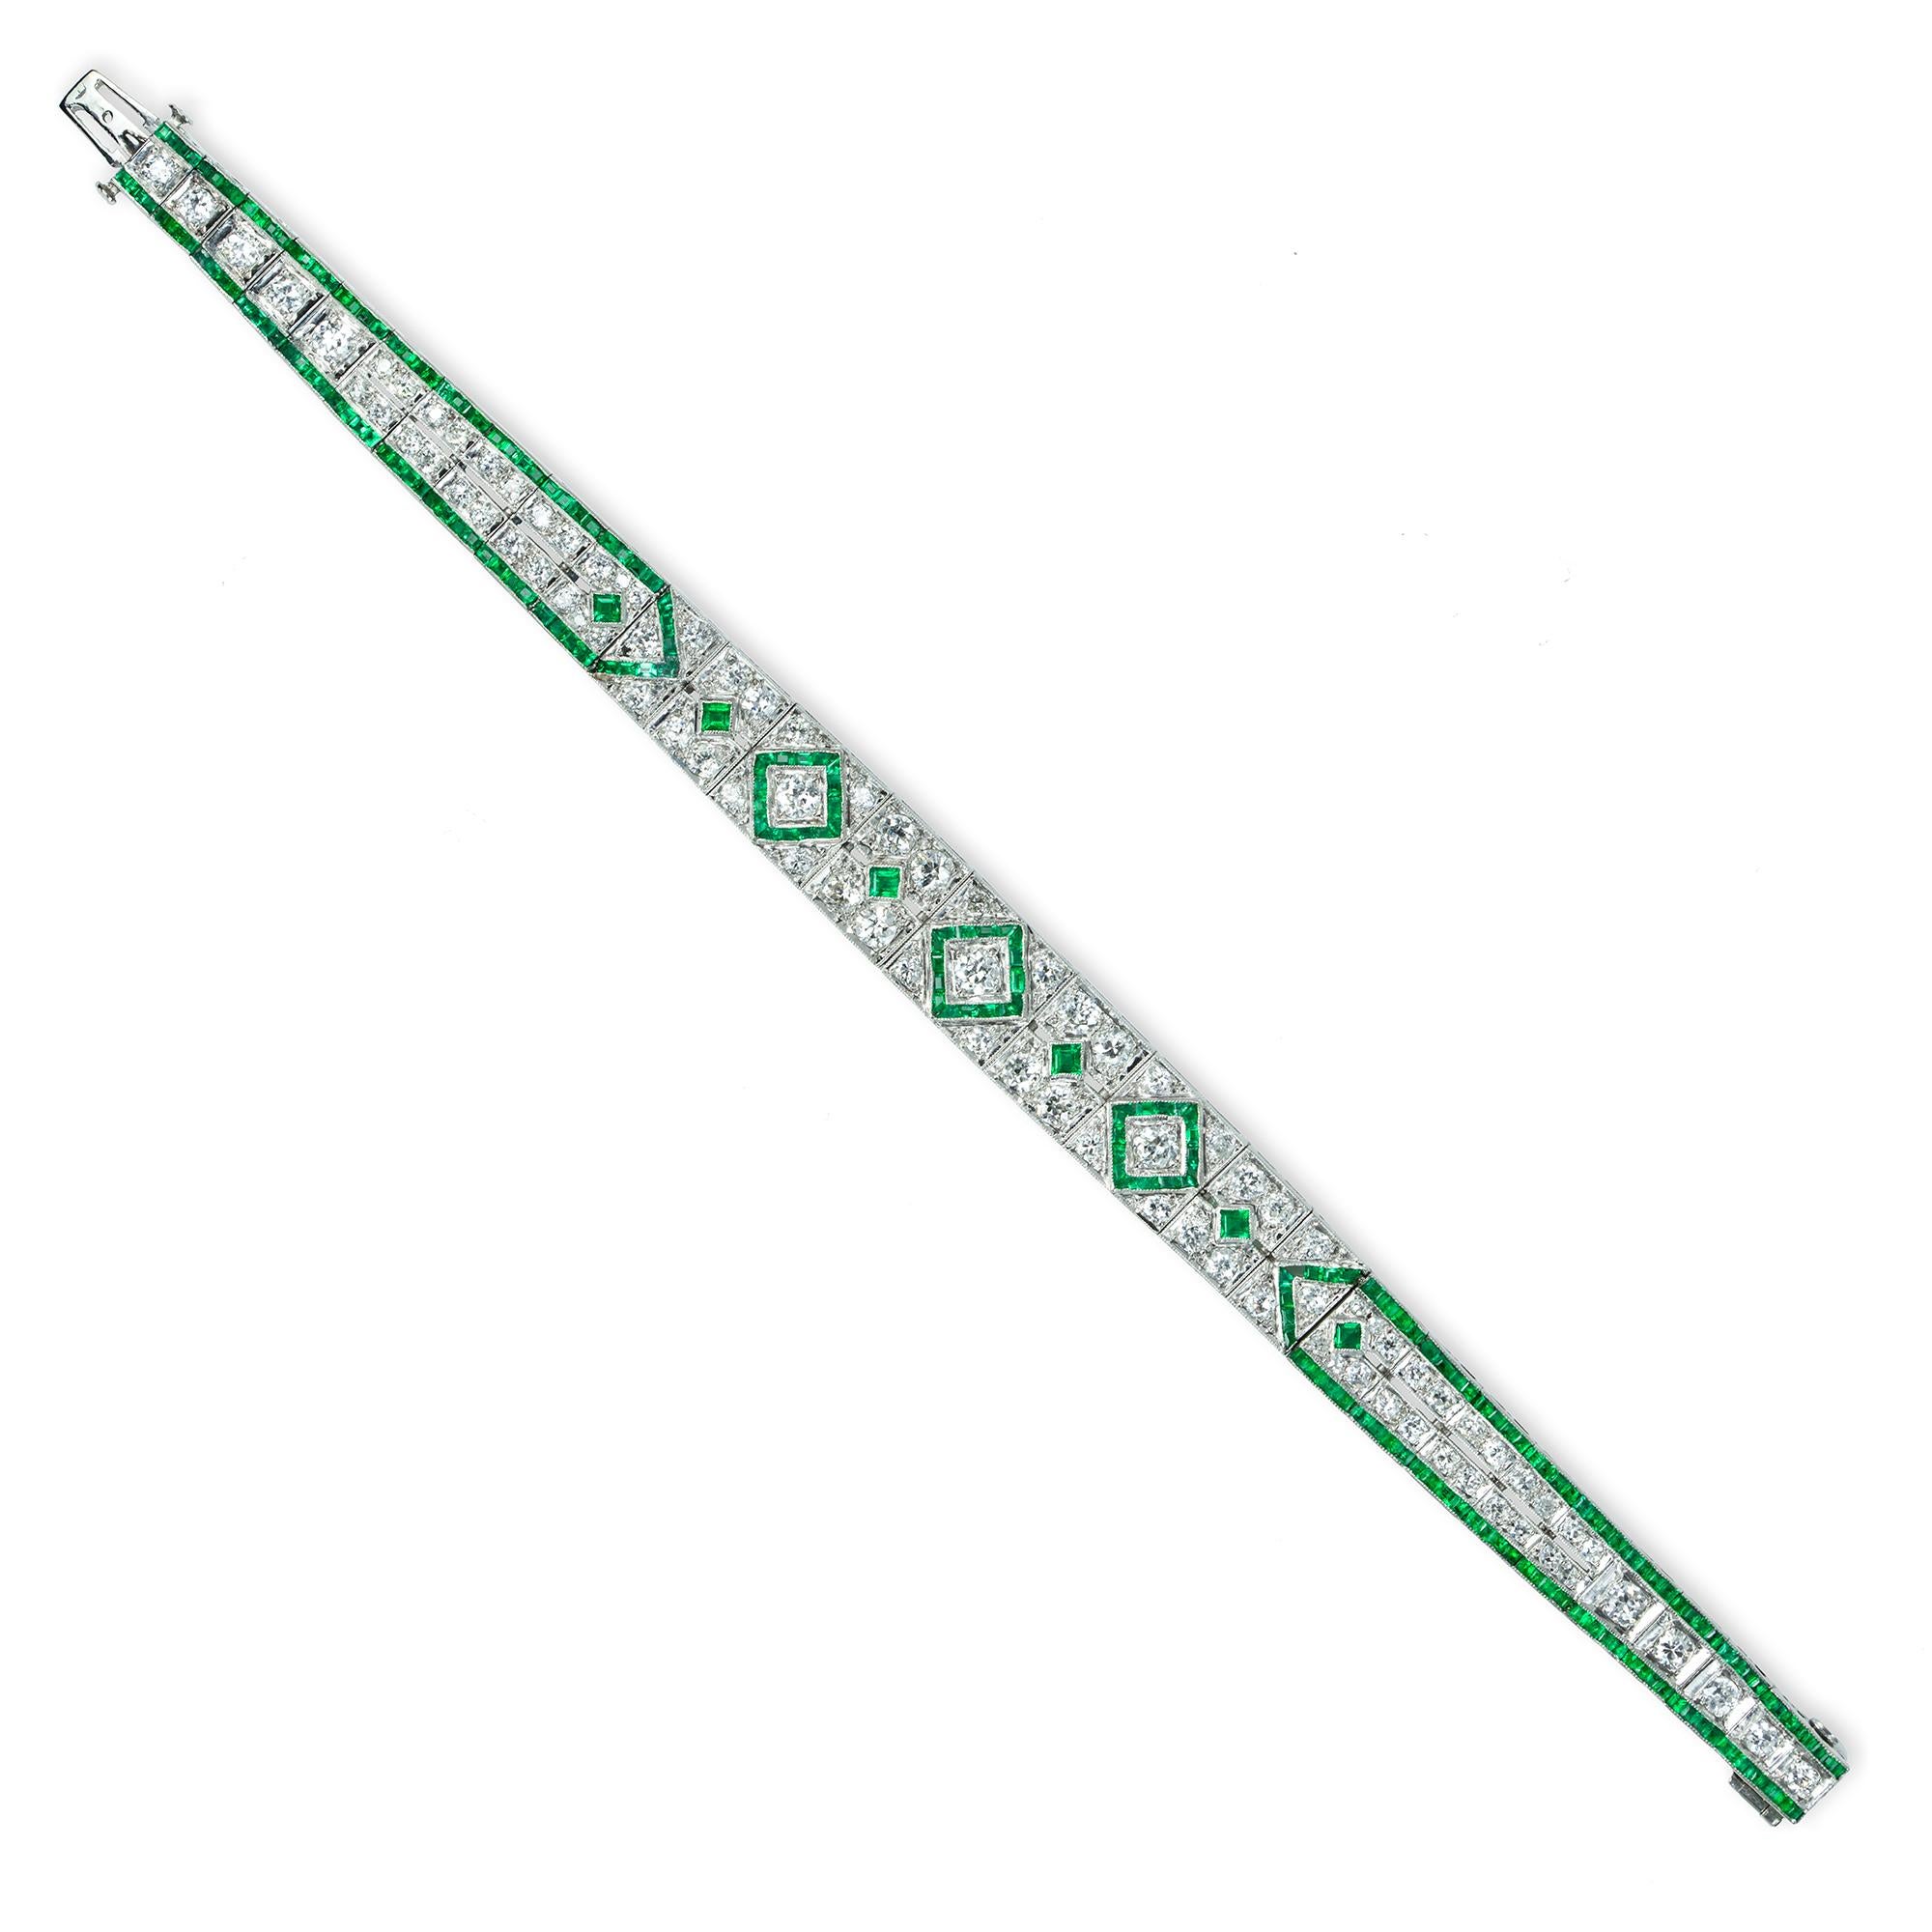 A fine Art Deco emerald and diamond bracelet, the twenty eight openwork panels of geometric design set calibre-cut emeralds weighing approximately a total of 1.20 carat and old cut diamonds weighing approximately a total of 4.75, all set in